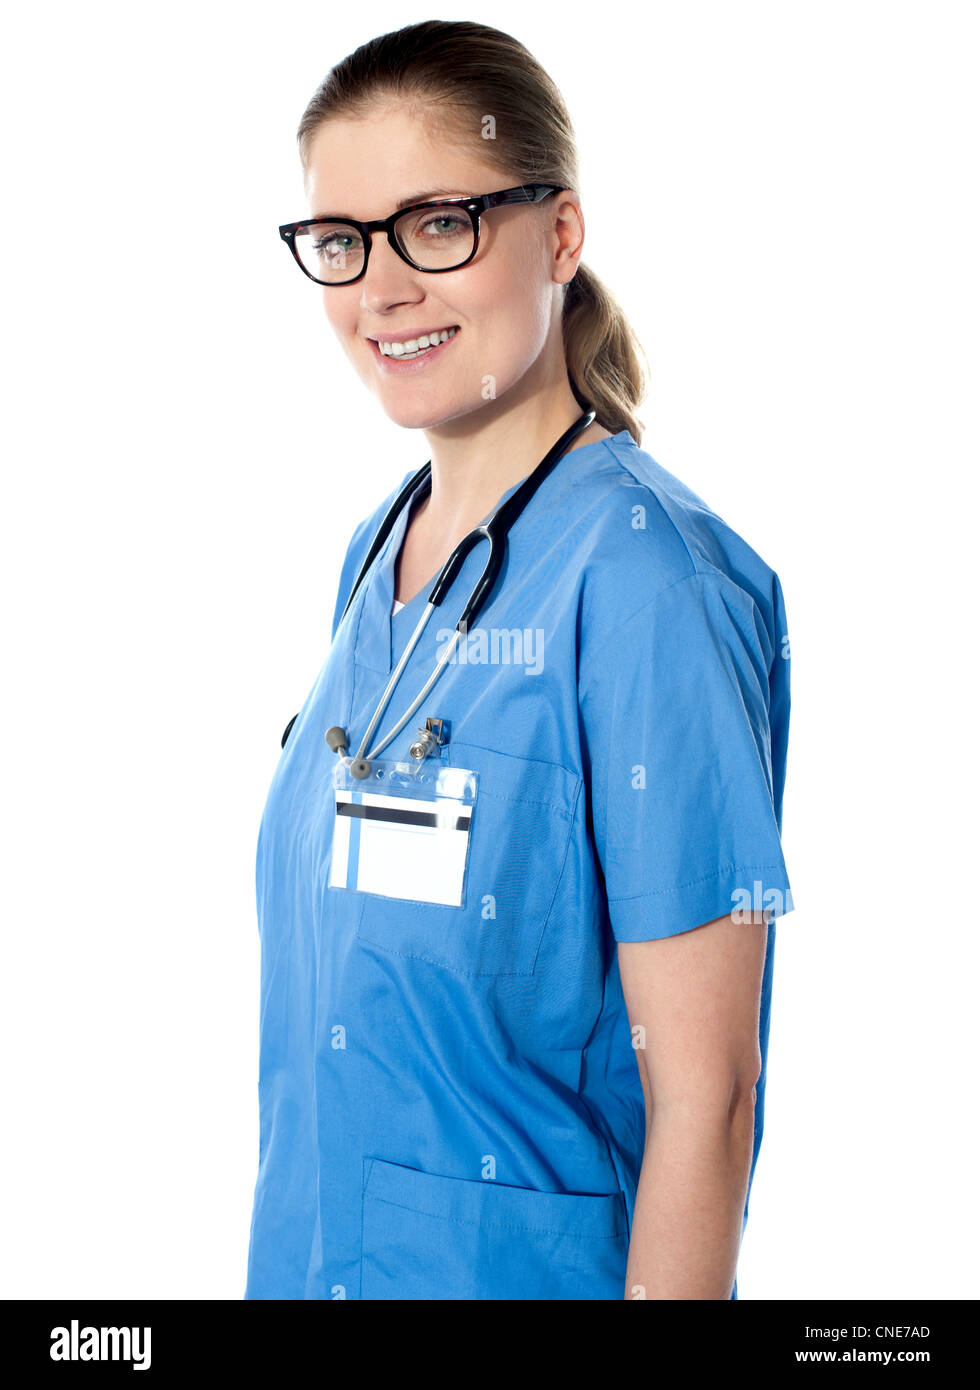 Image of an exprienced physician, stethoscope around her neck Stock Photo